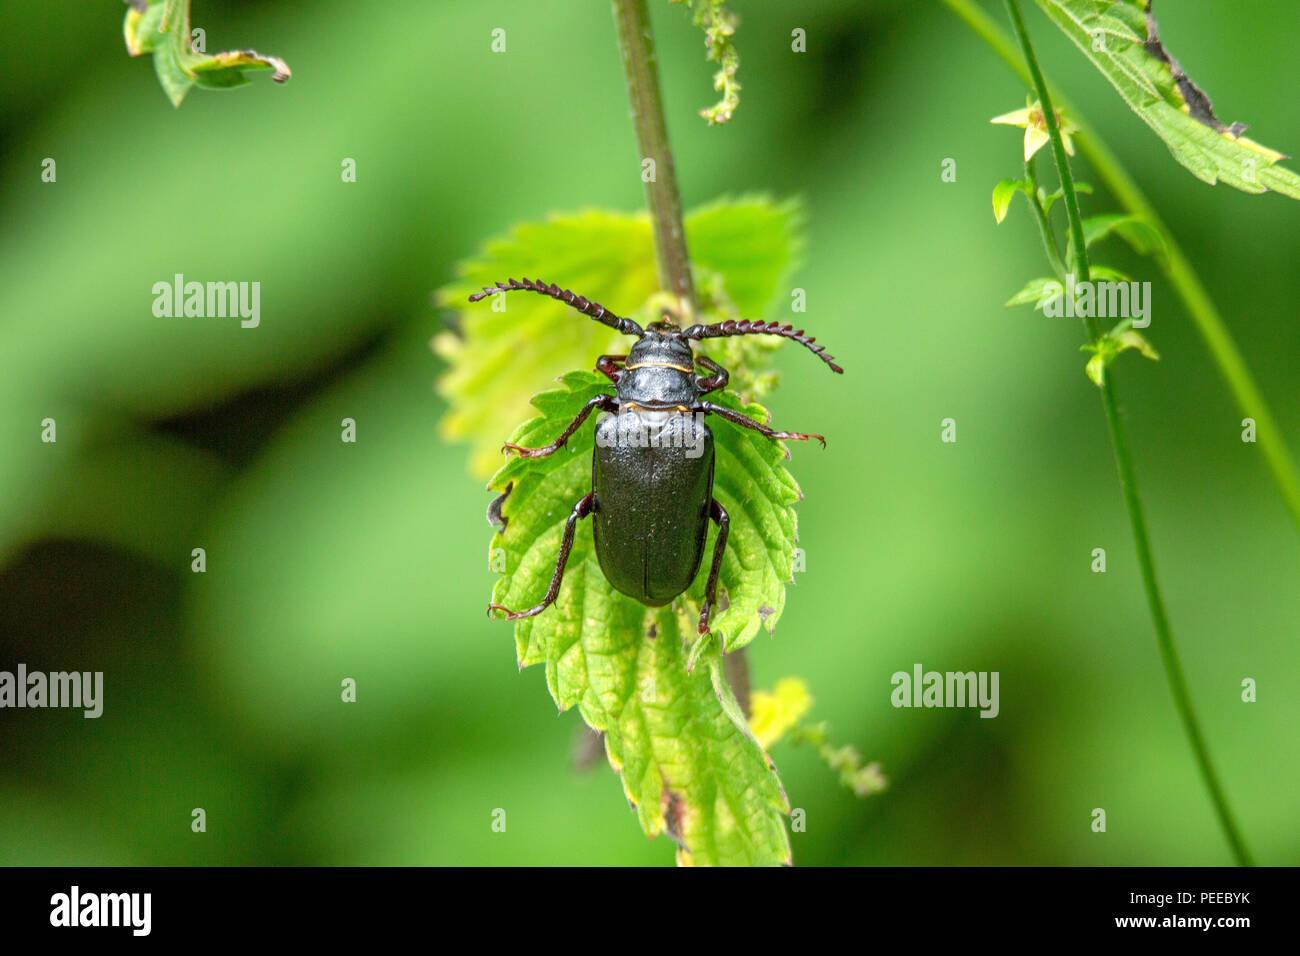 Prionus coriarius , Nature, Switzerland, Insect, the tanner, the sawyer,  longhorn beetle Stock Photo